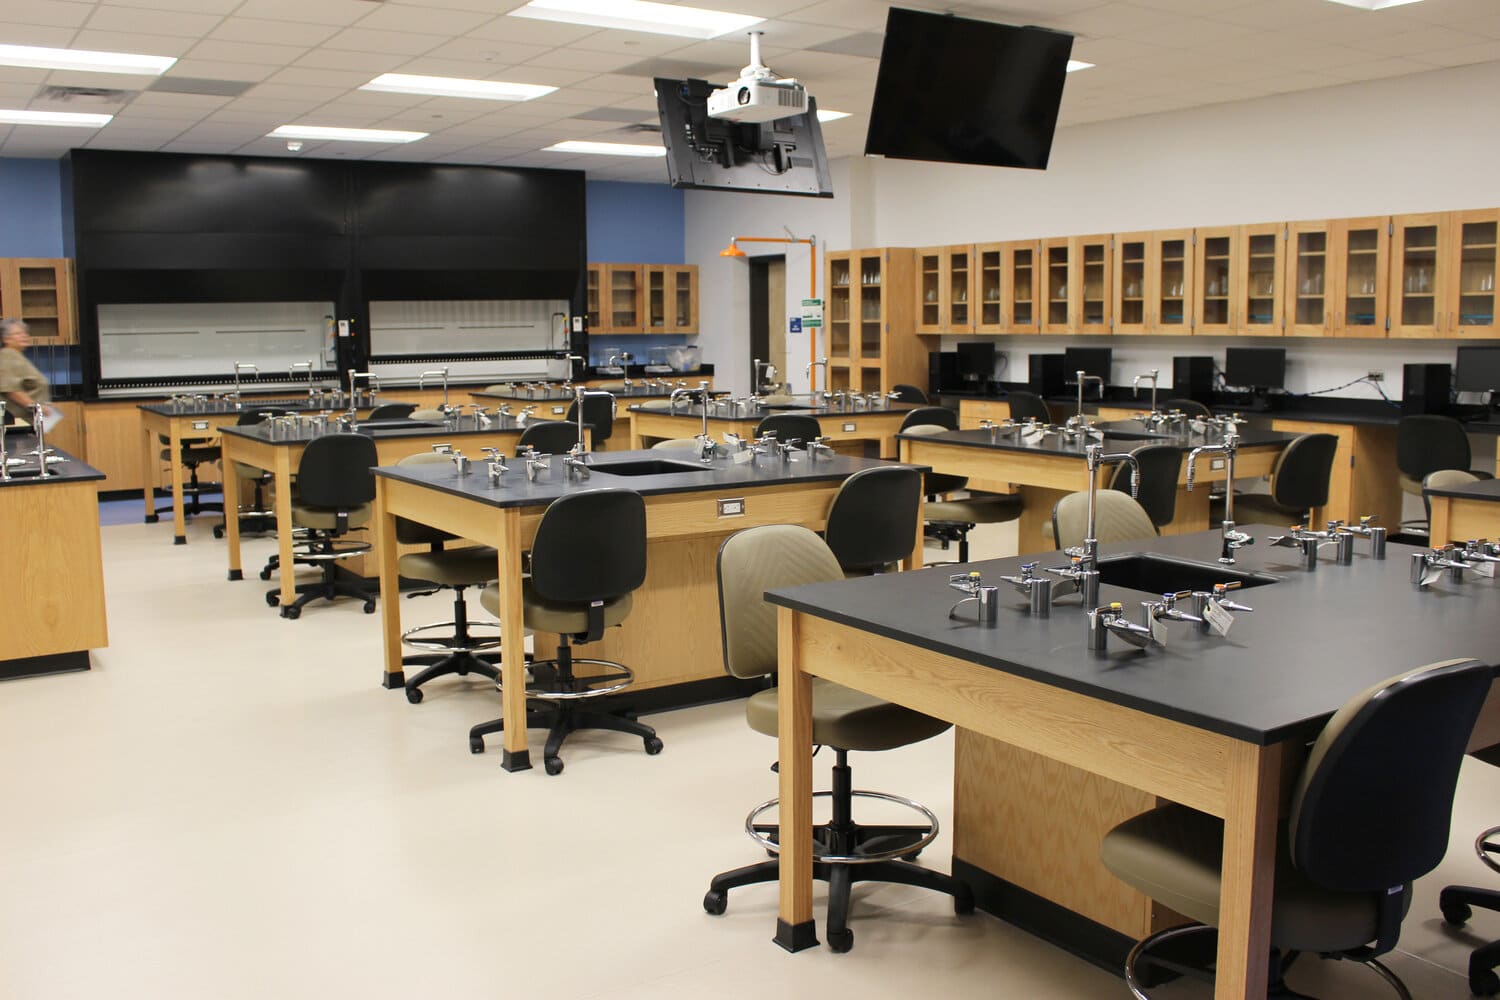 Modern chemistry laboratory with equipment and furniture.